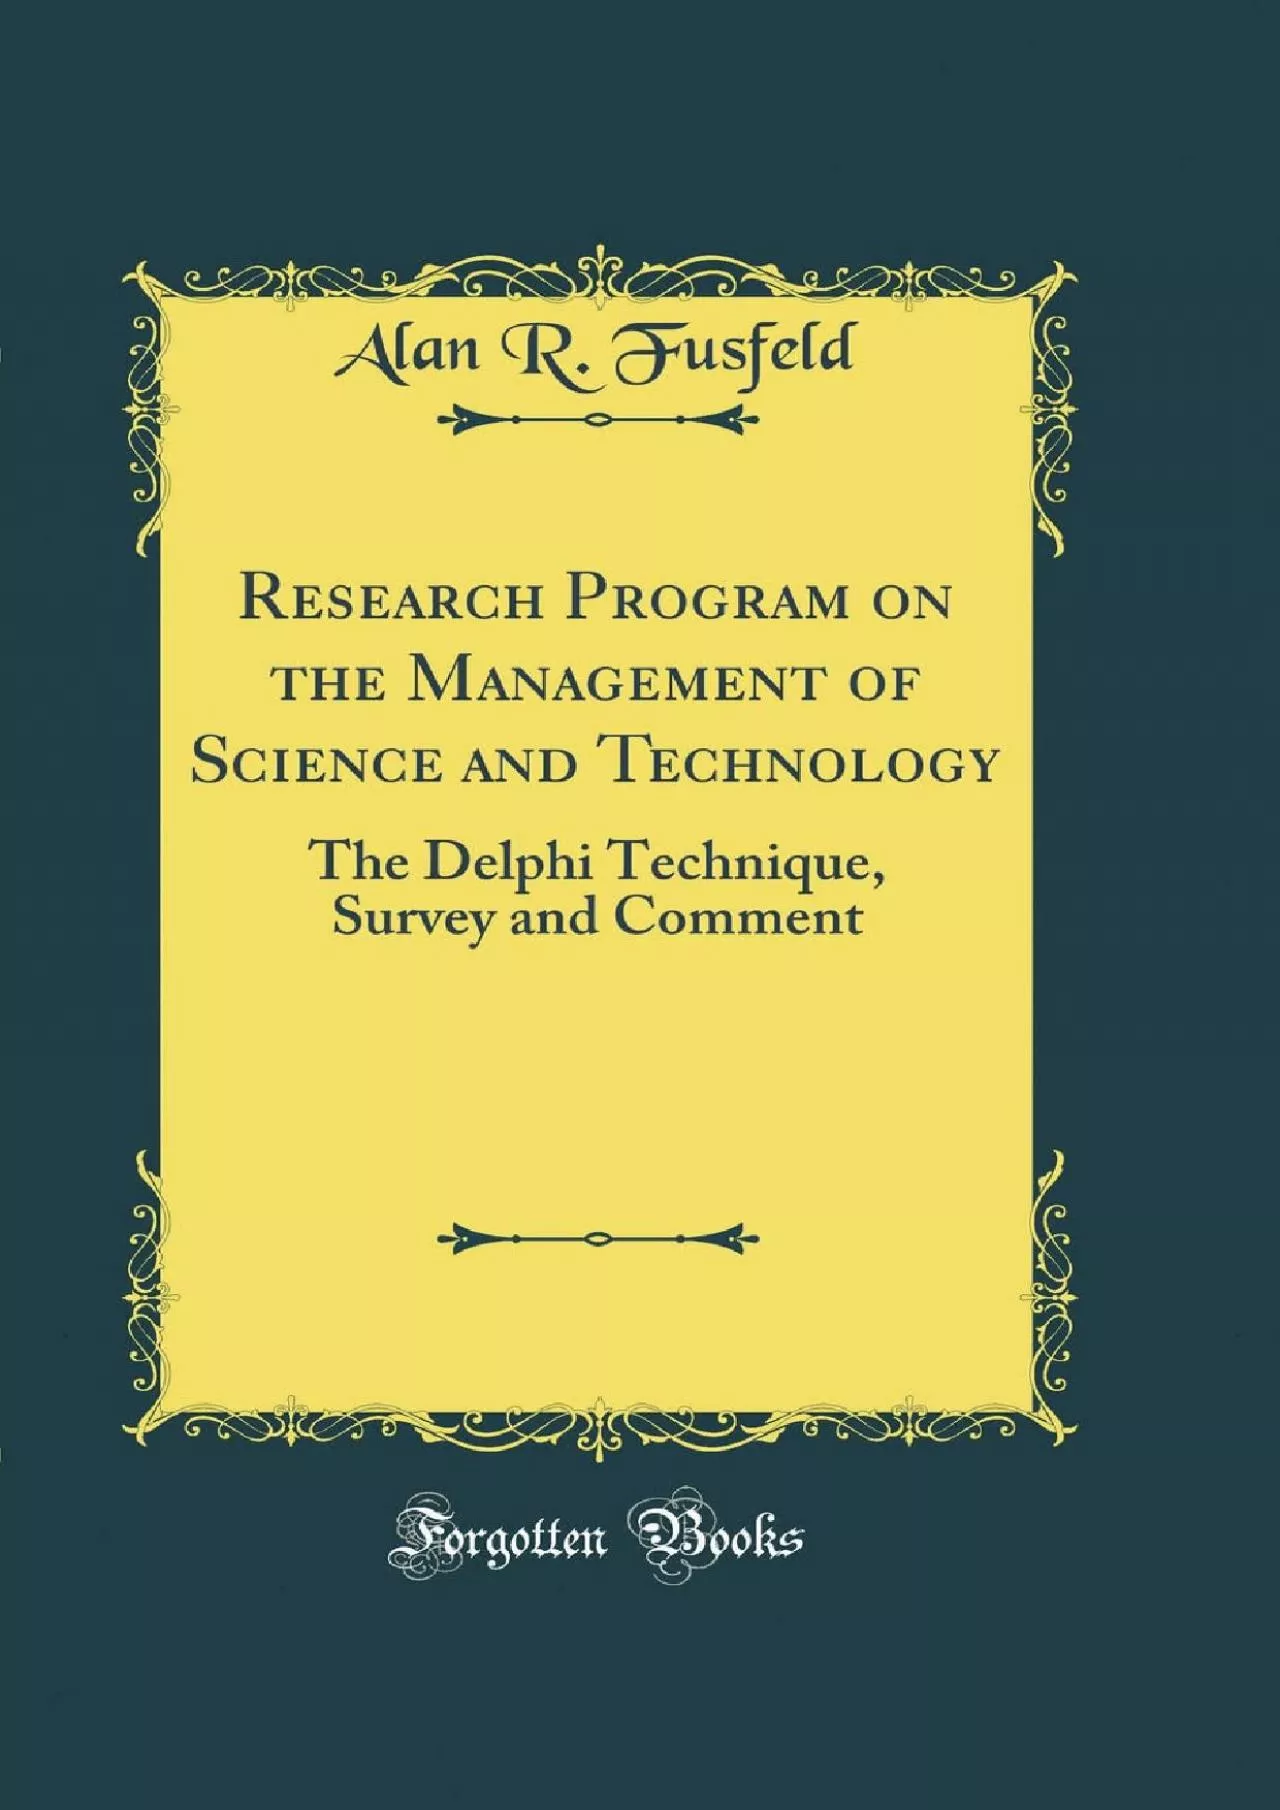 [BEST]-Research Program on the Management of Science and Technology: The Delphi Technique,